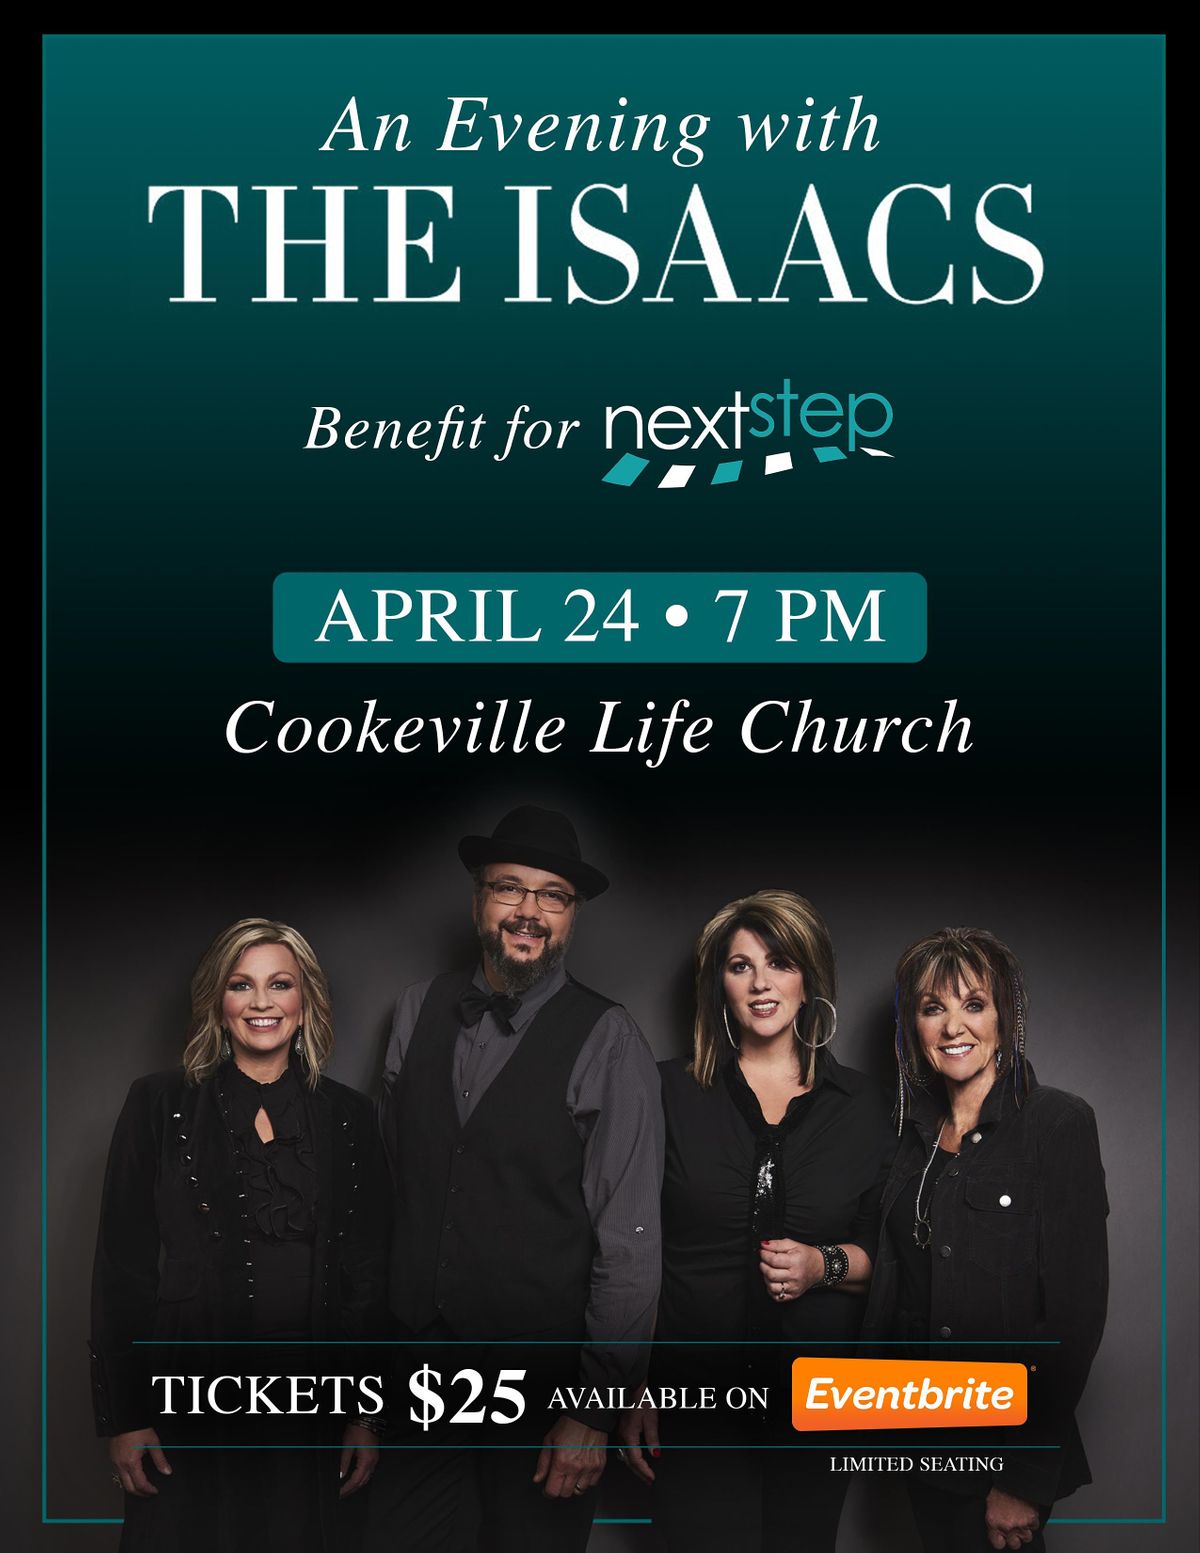 An Evening with the Isaacs, LIFE CHURCH, Cookeville, 24 April 2022